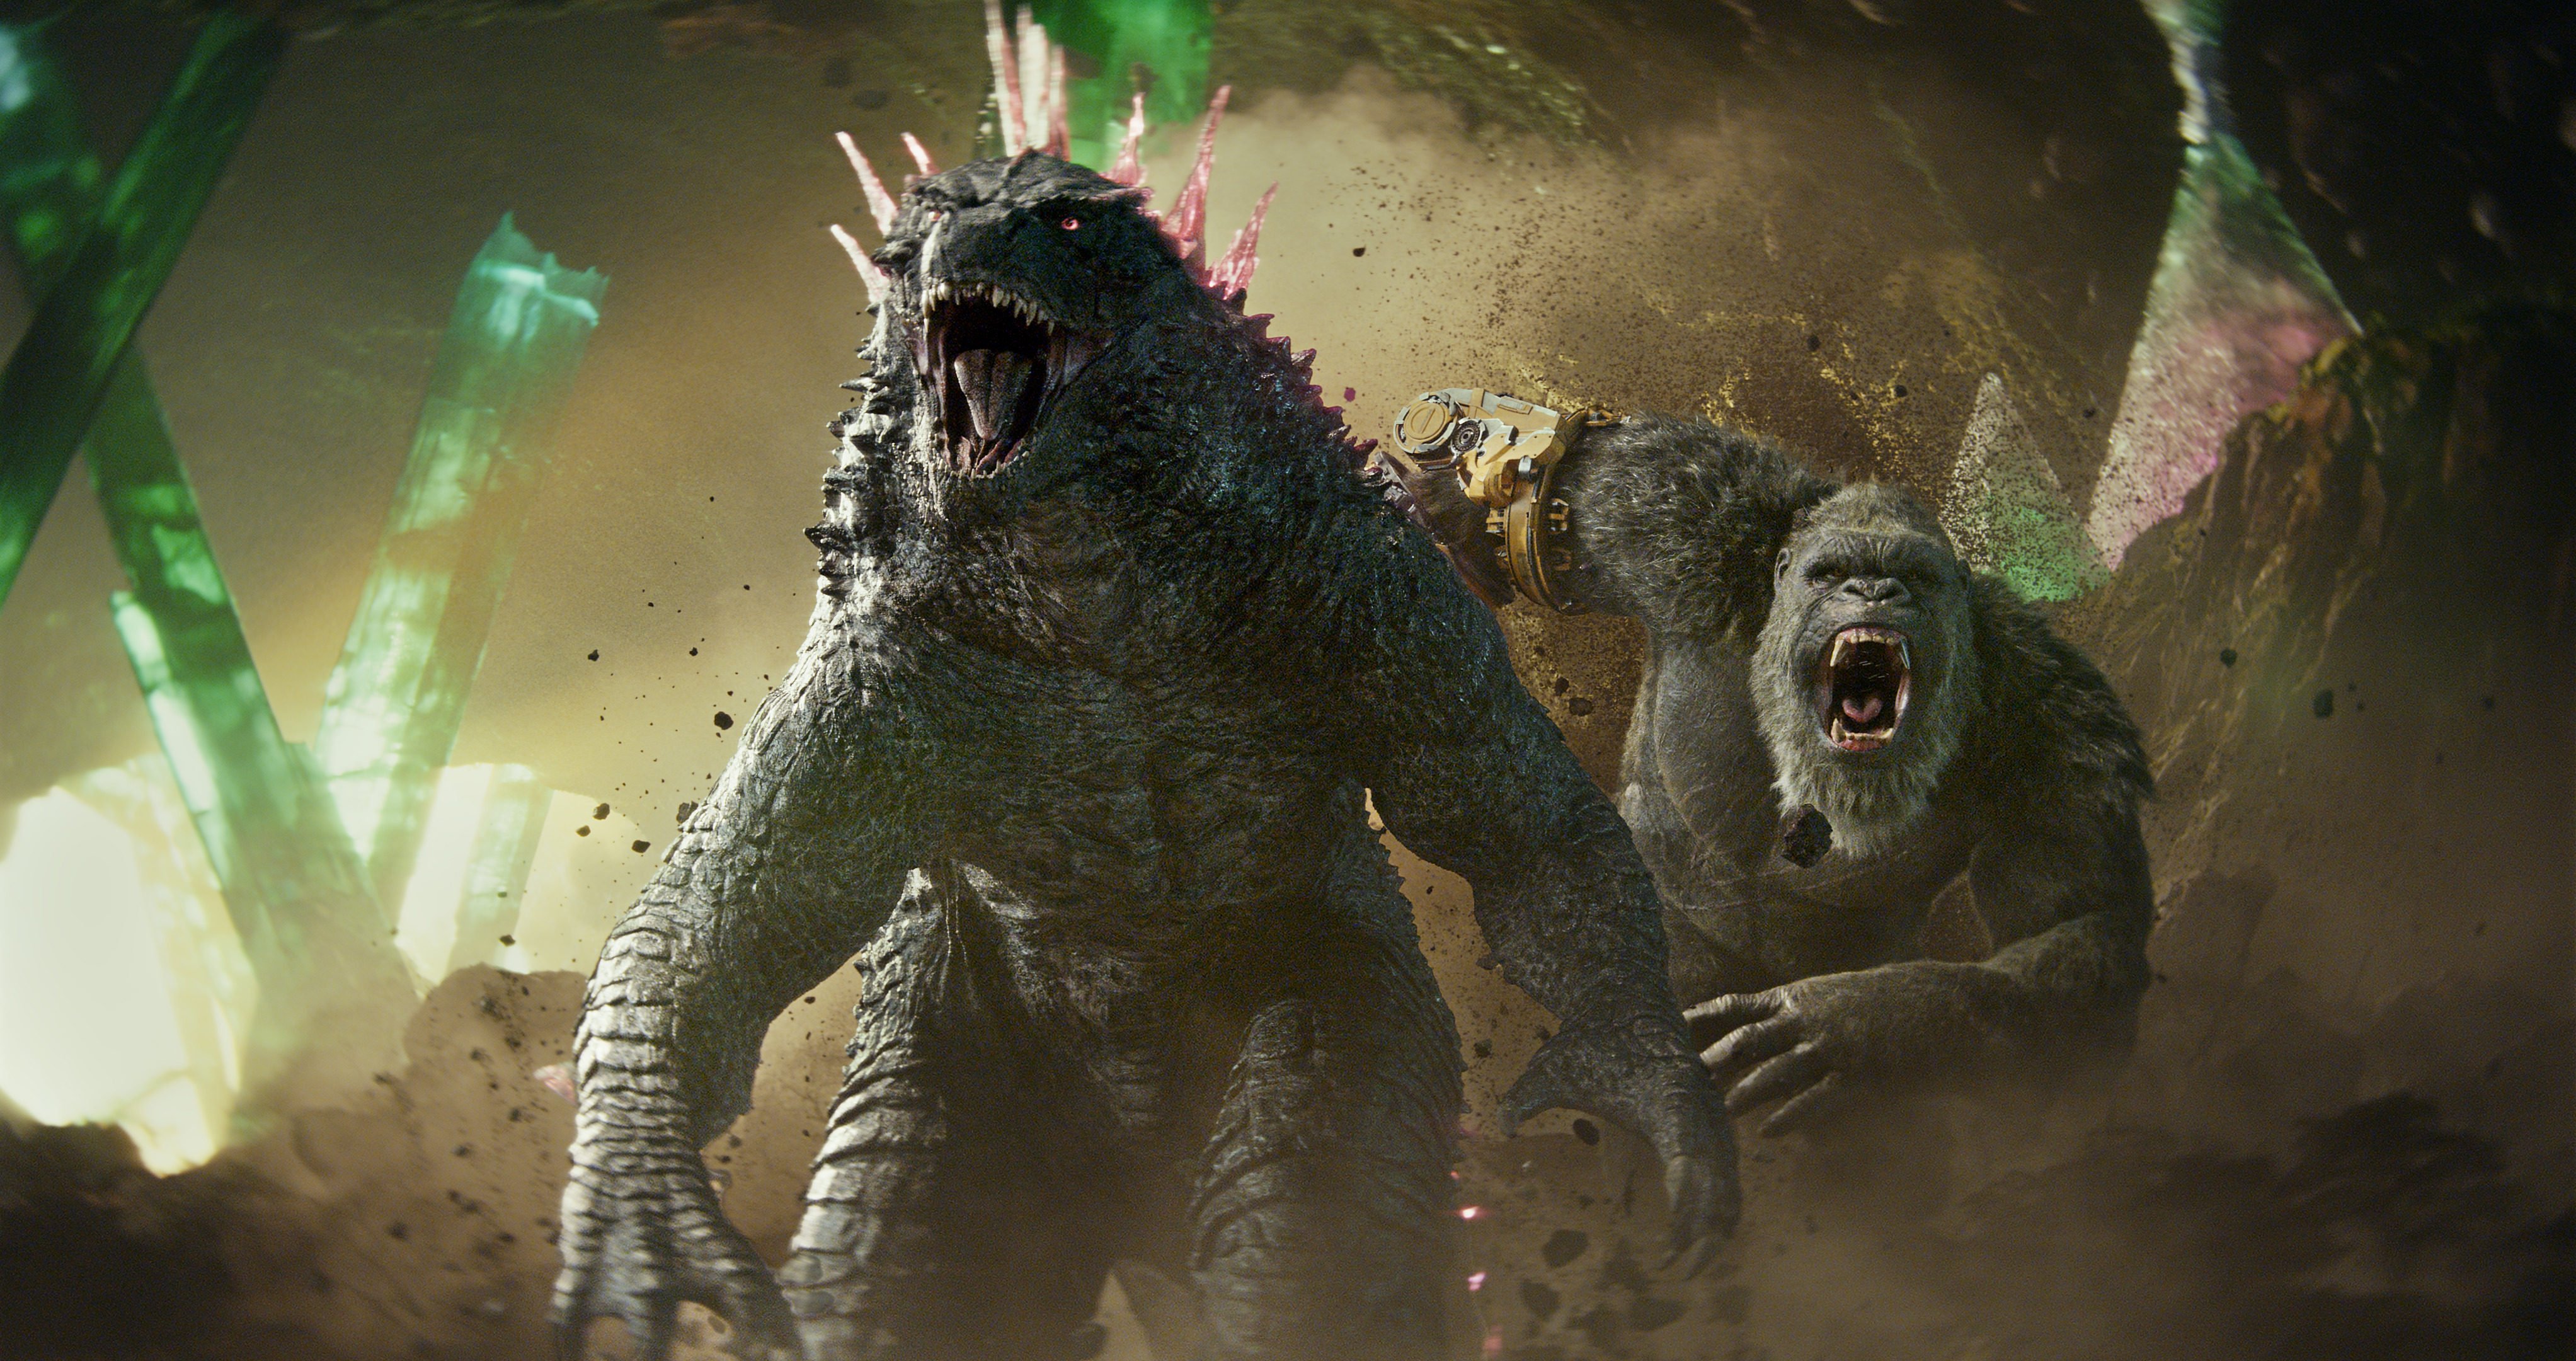 Godzilla (left) and Kong in a still from Godzilla x Kong: The New Empire (category IIA), directed by Adam Wingard and starring Rebecca Hall and Dan Stevens. Photo: Warner Bros. Pictures.